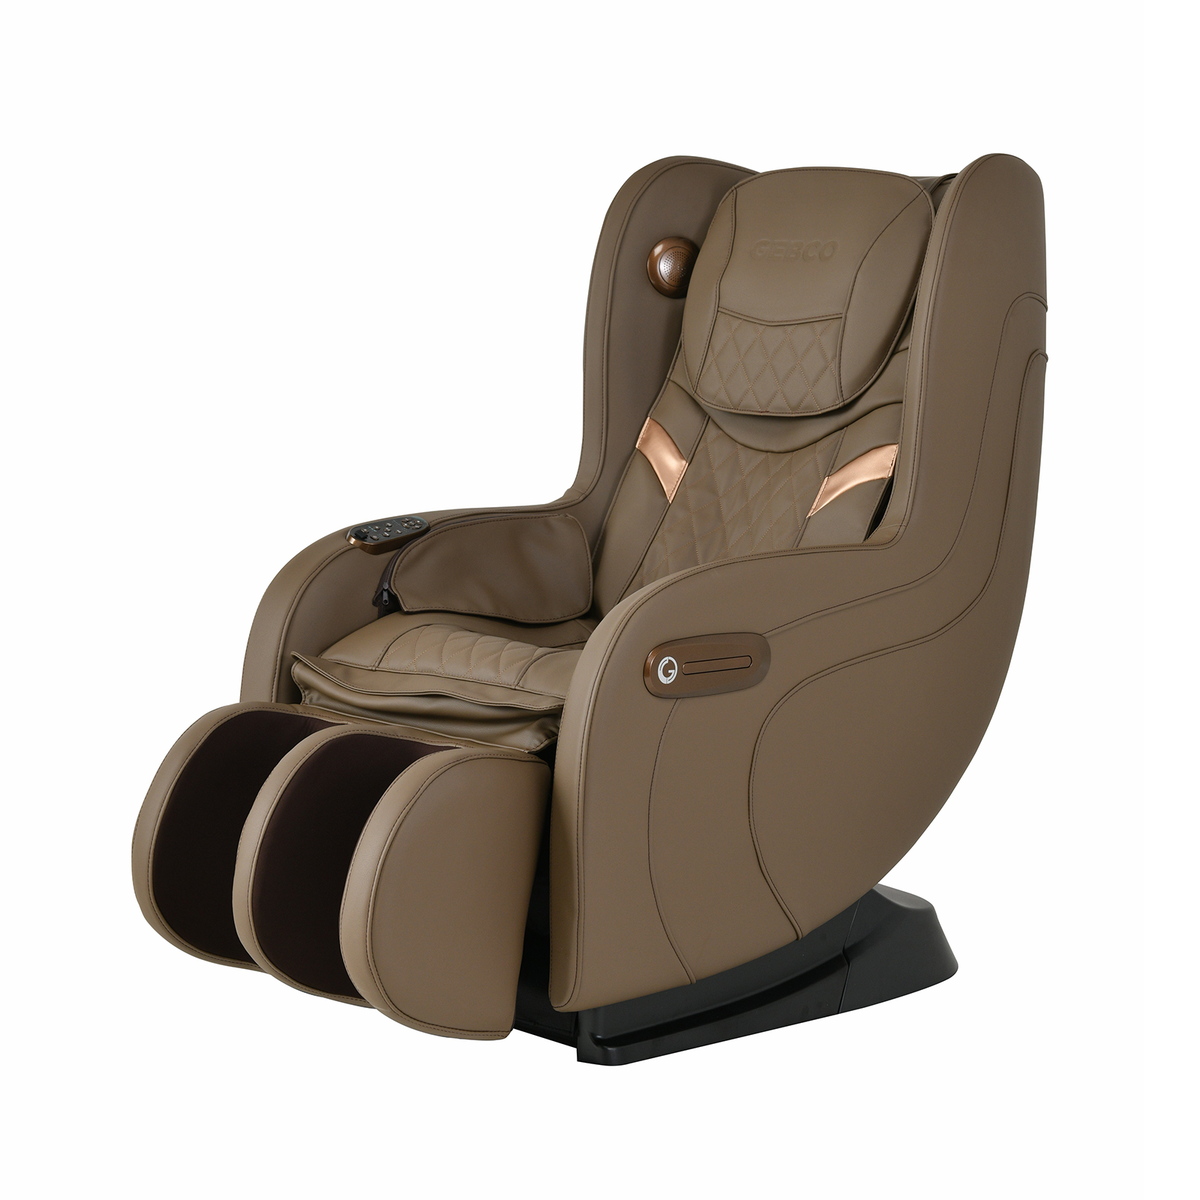 2022 GEBCO Comely SL-Track Lite Massage Chair (Brown)